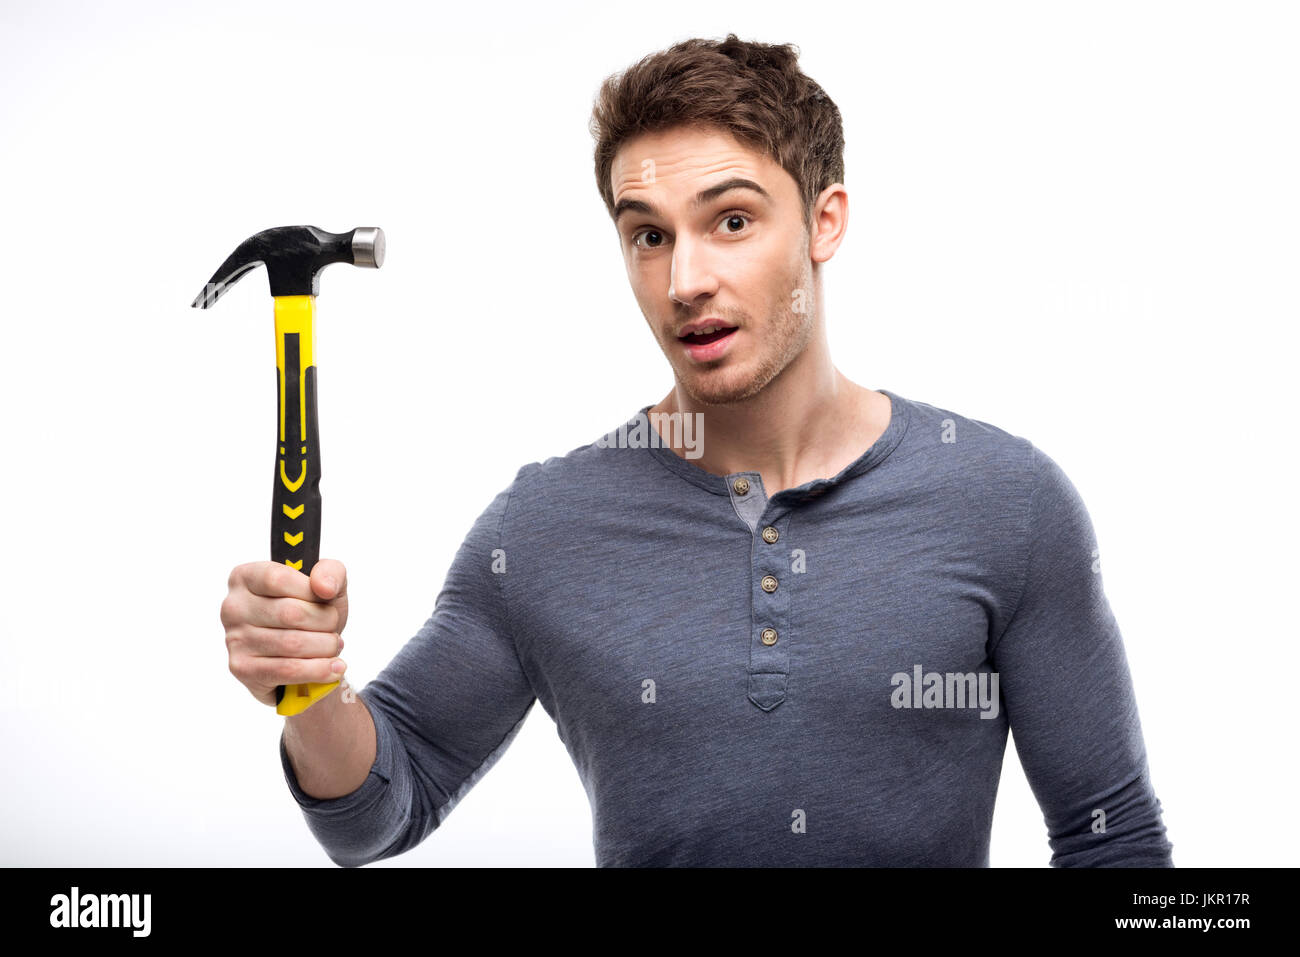 handsome man holding hammer isolated on white, handyman tools concept Stock Photo